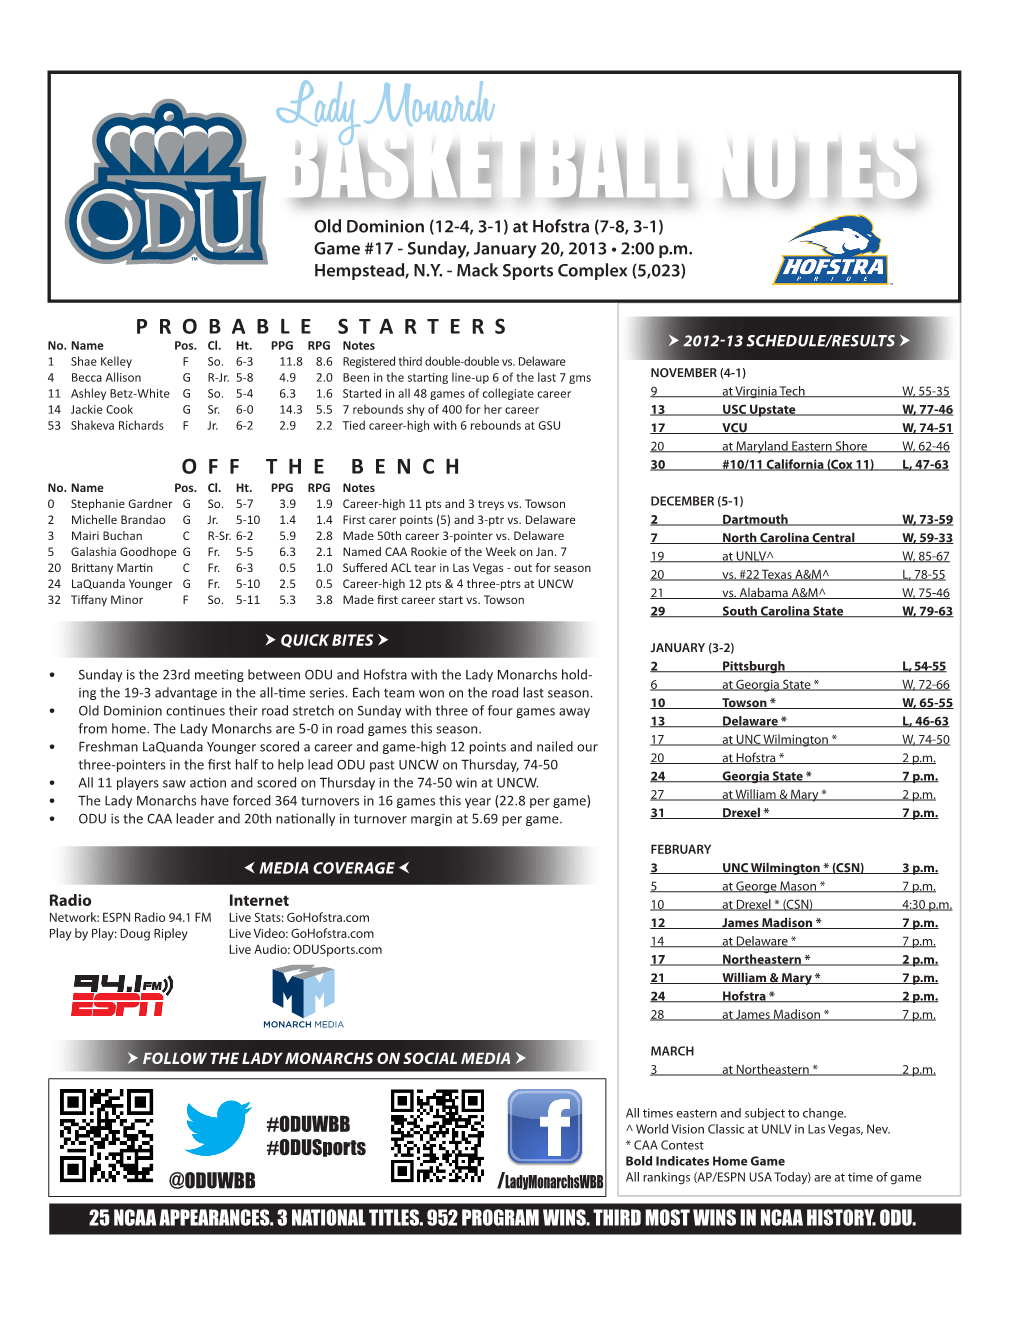 BASKETBALL NOTES Old Dominion (12-4, 3-1) at Hofstra (7-8, 3-1) Game #17 - Sunday, January 20, 2013 • 2:00 P.M